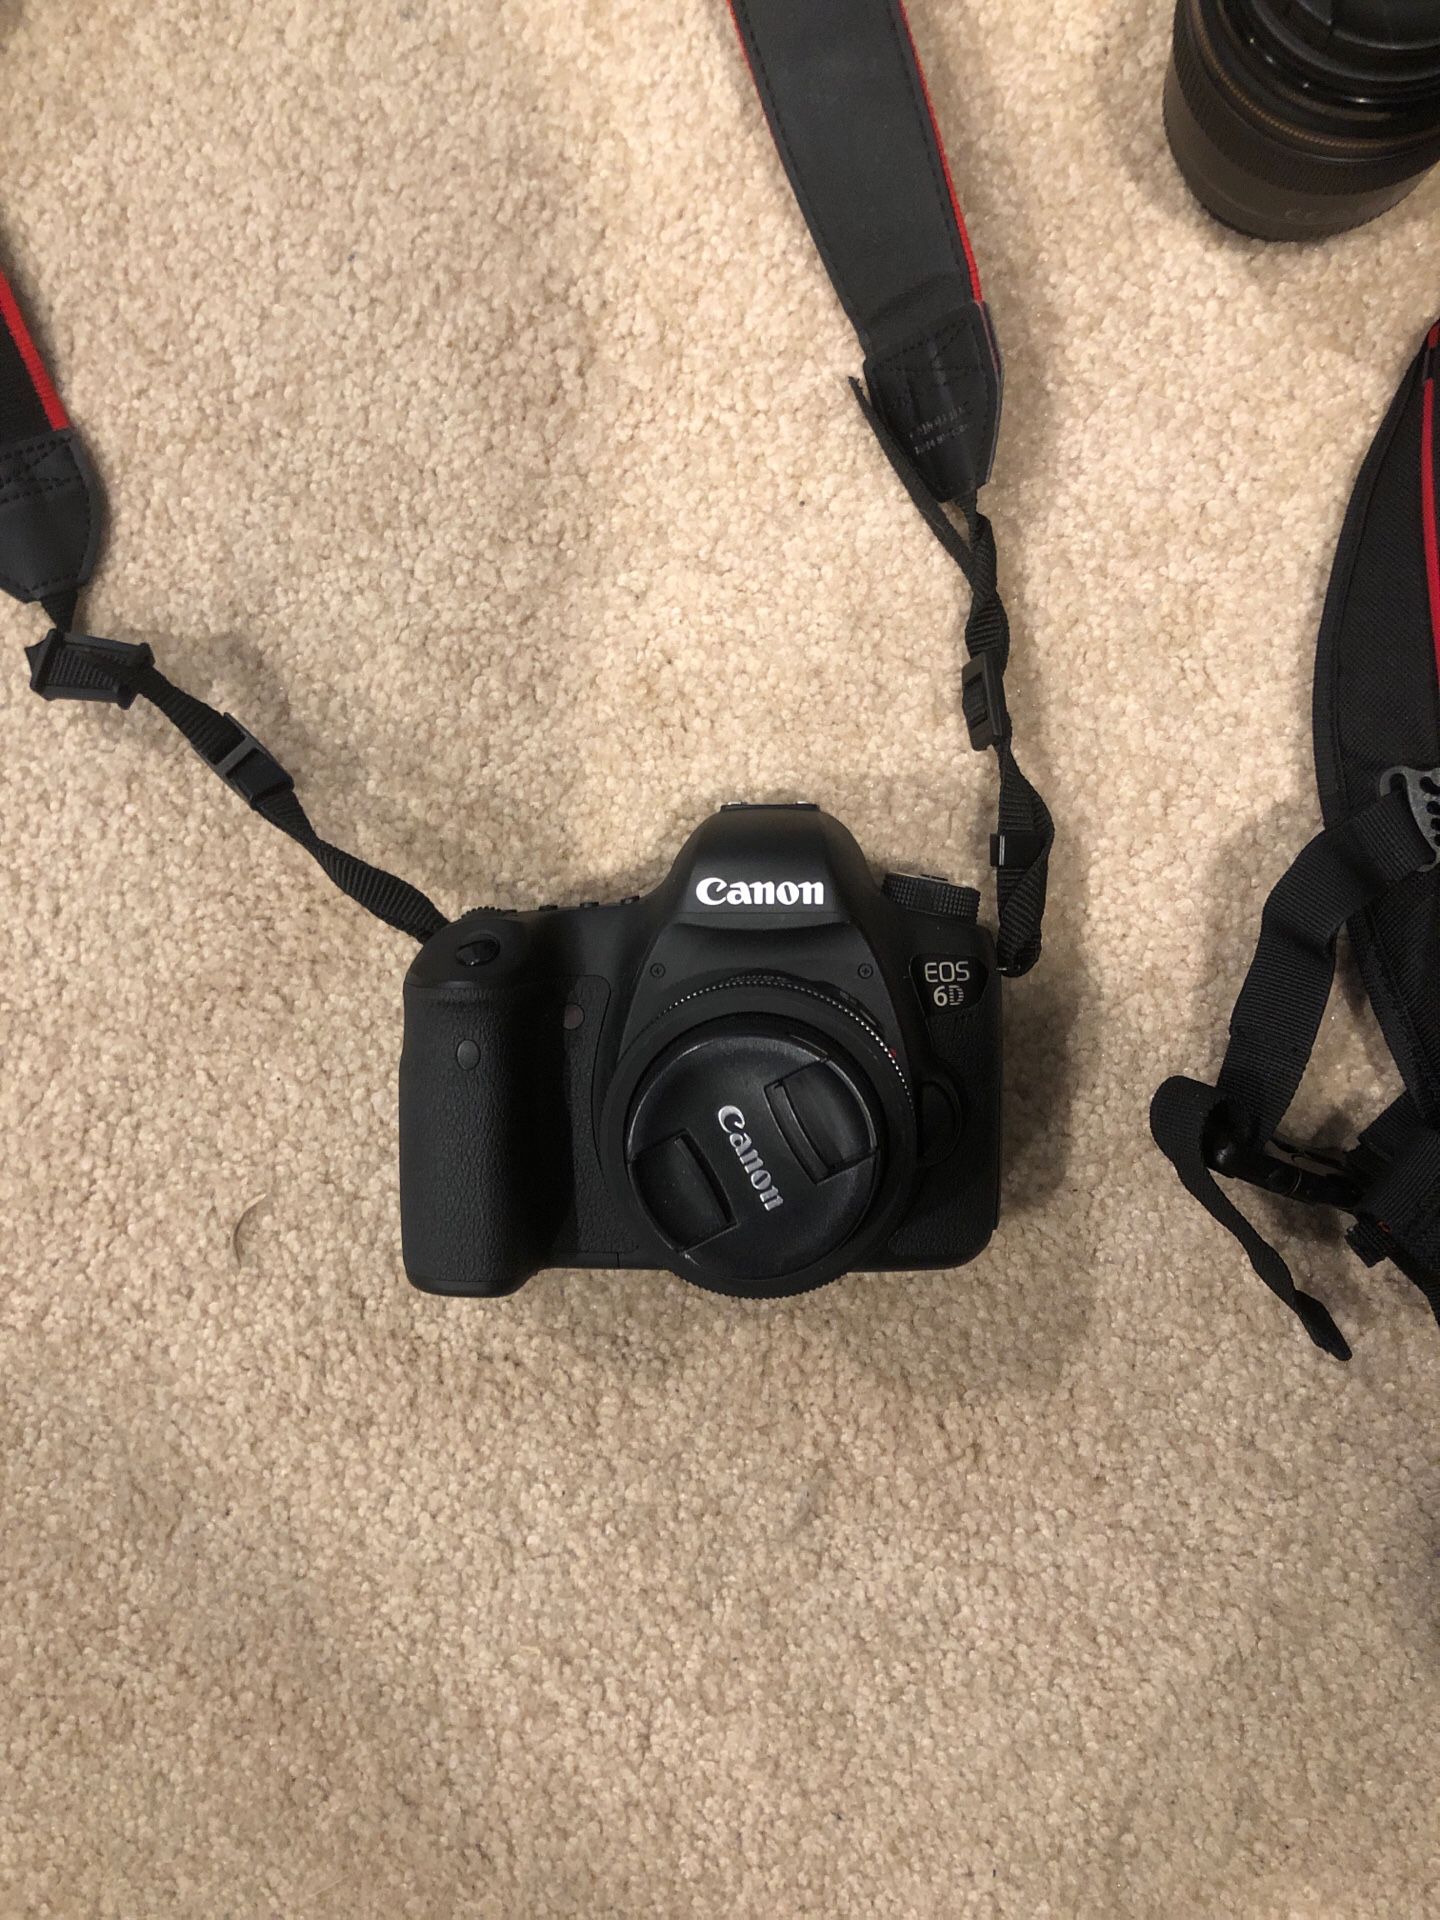 Canon 6D, 40mm, and bag